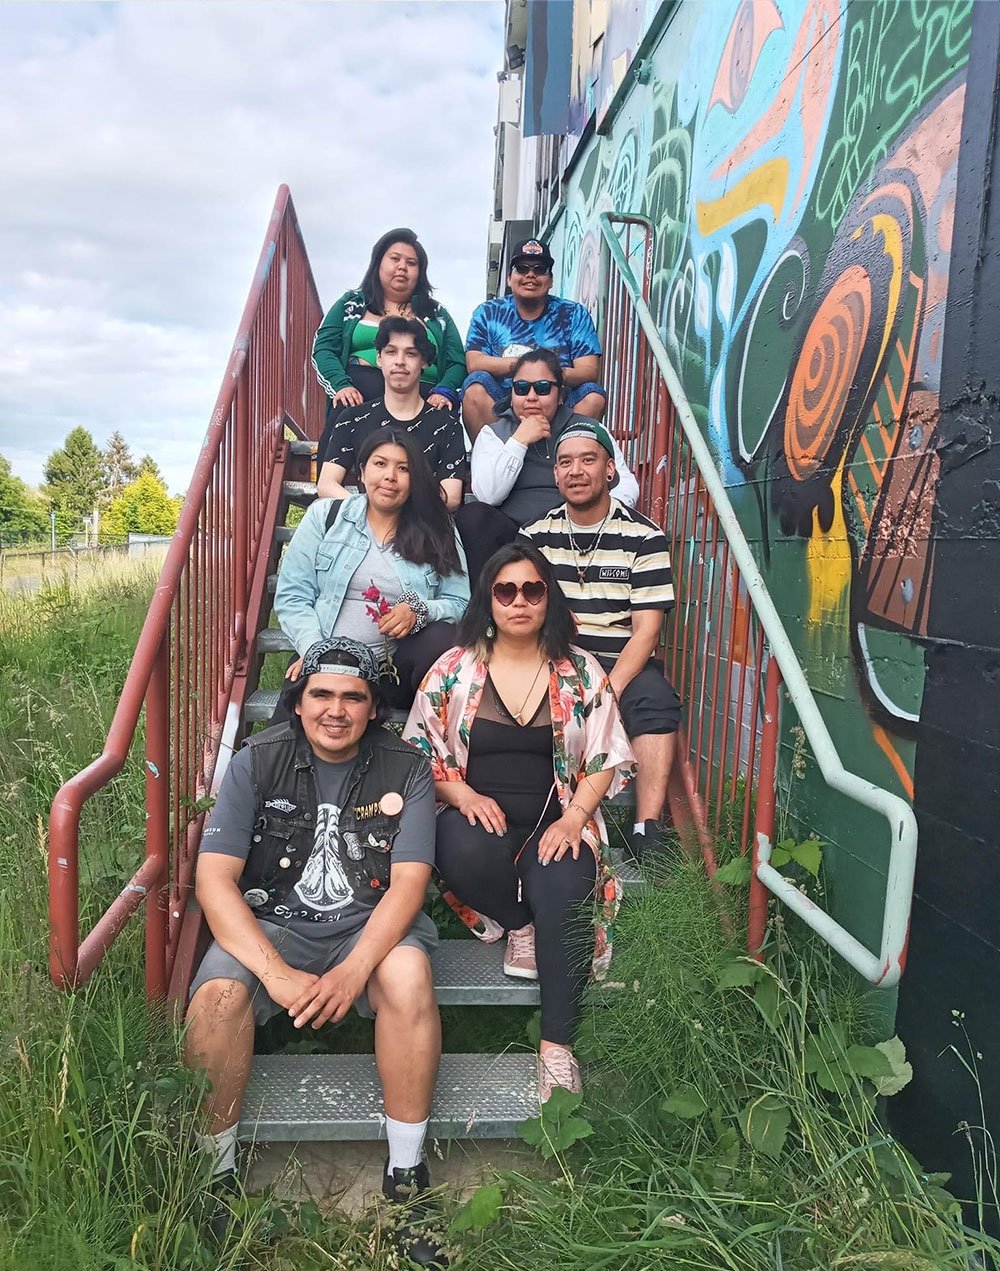 Alex Taylor-McCallum is seated on the bottom stair, to the left of the staircase, with seven people next to one of his pieces of artwork. Long green grass grows around the stairs. It’s a sunny day and people are looking at the camera, smiling.